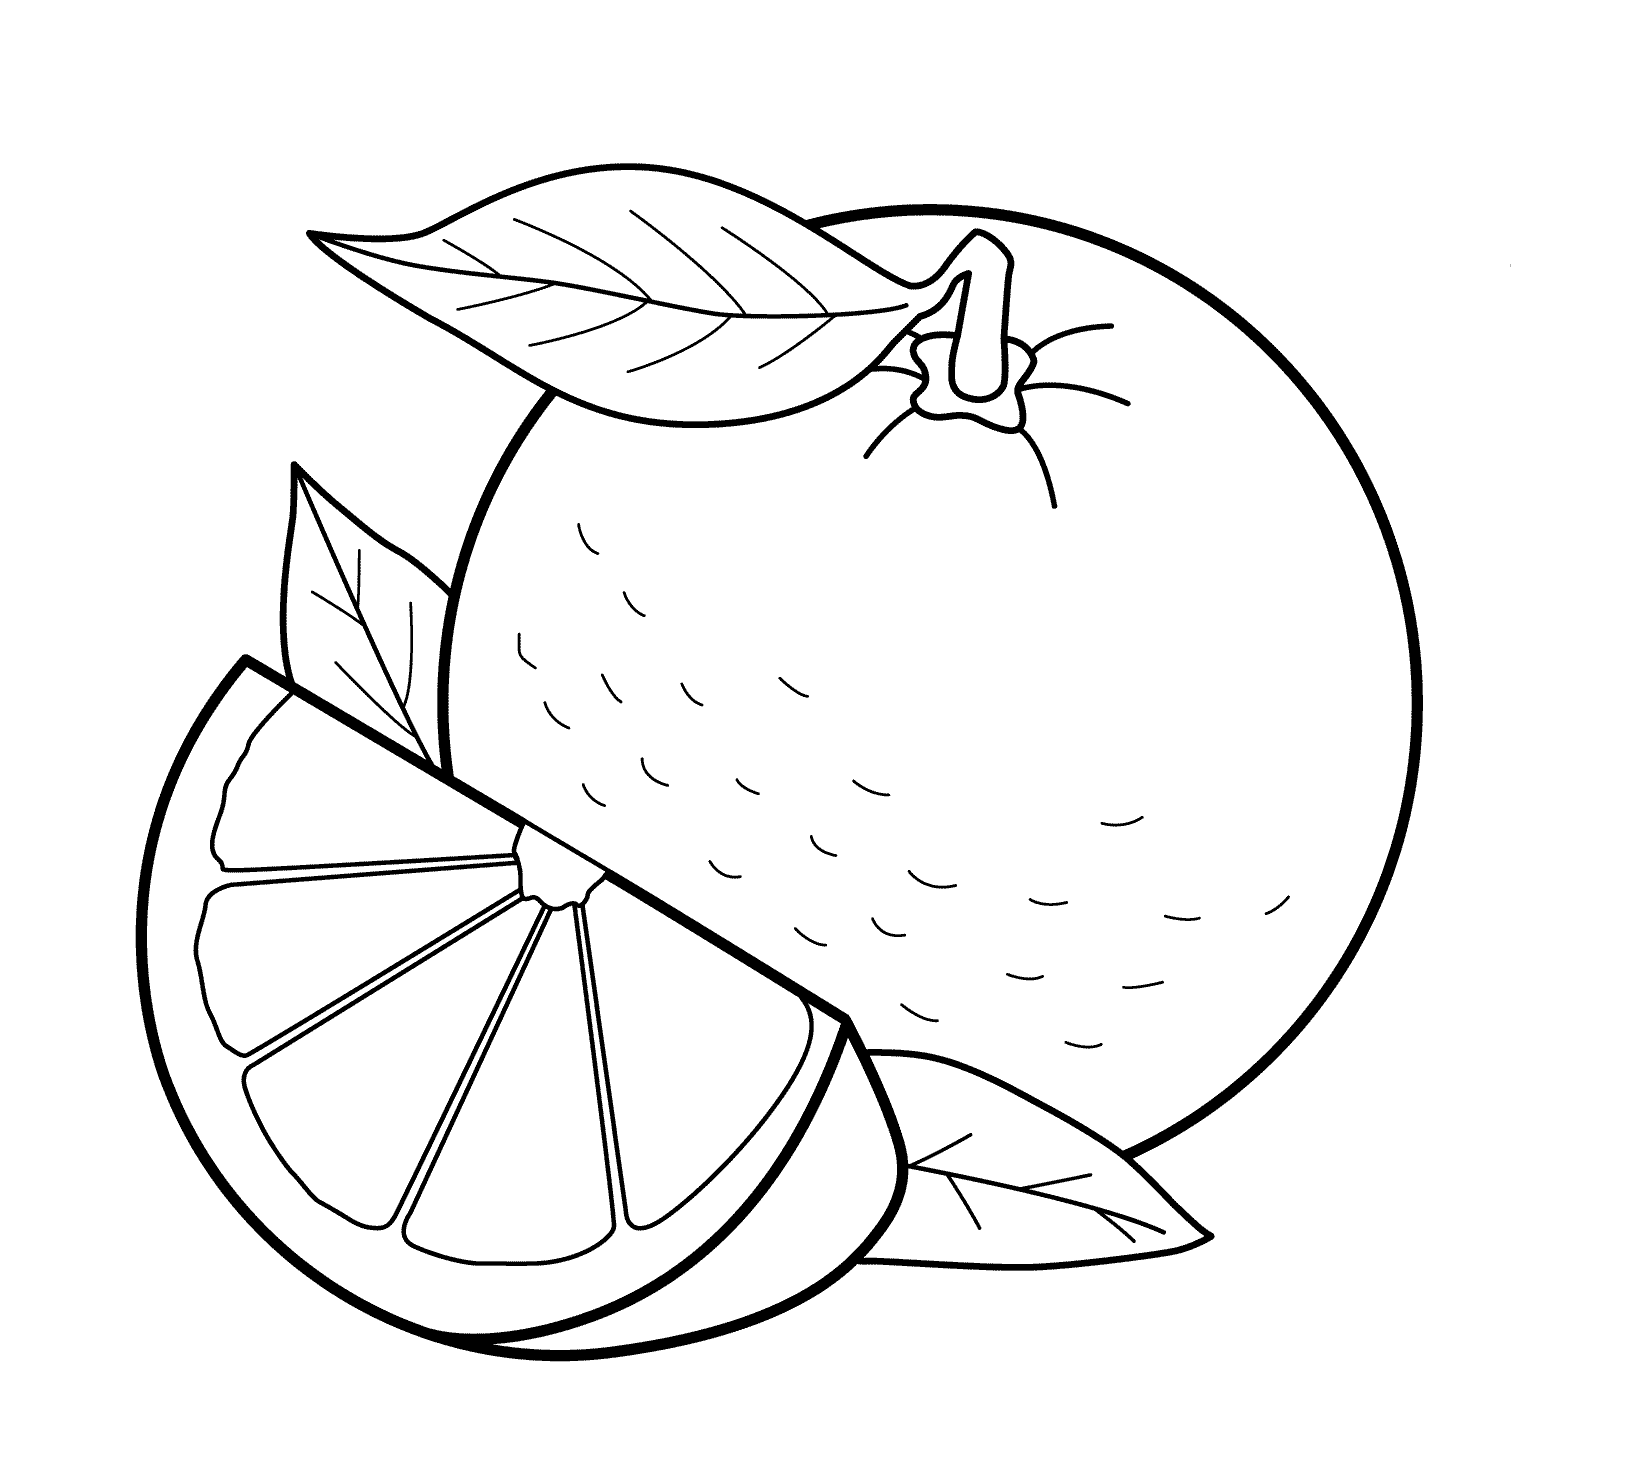 fruit coloring pages free printable fruit coloring pages for kids fruit coloring pages 